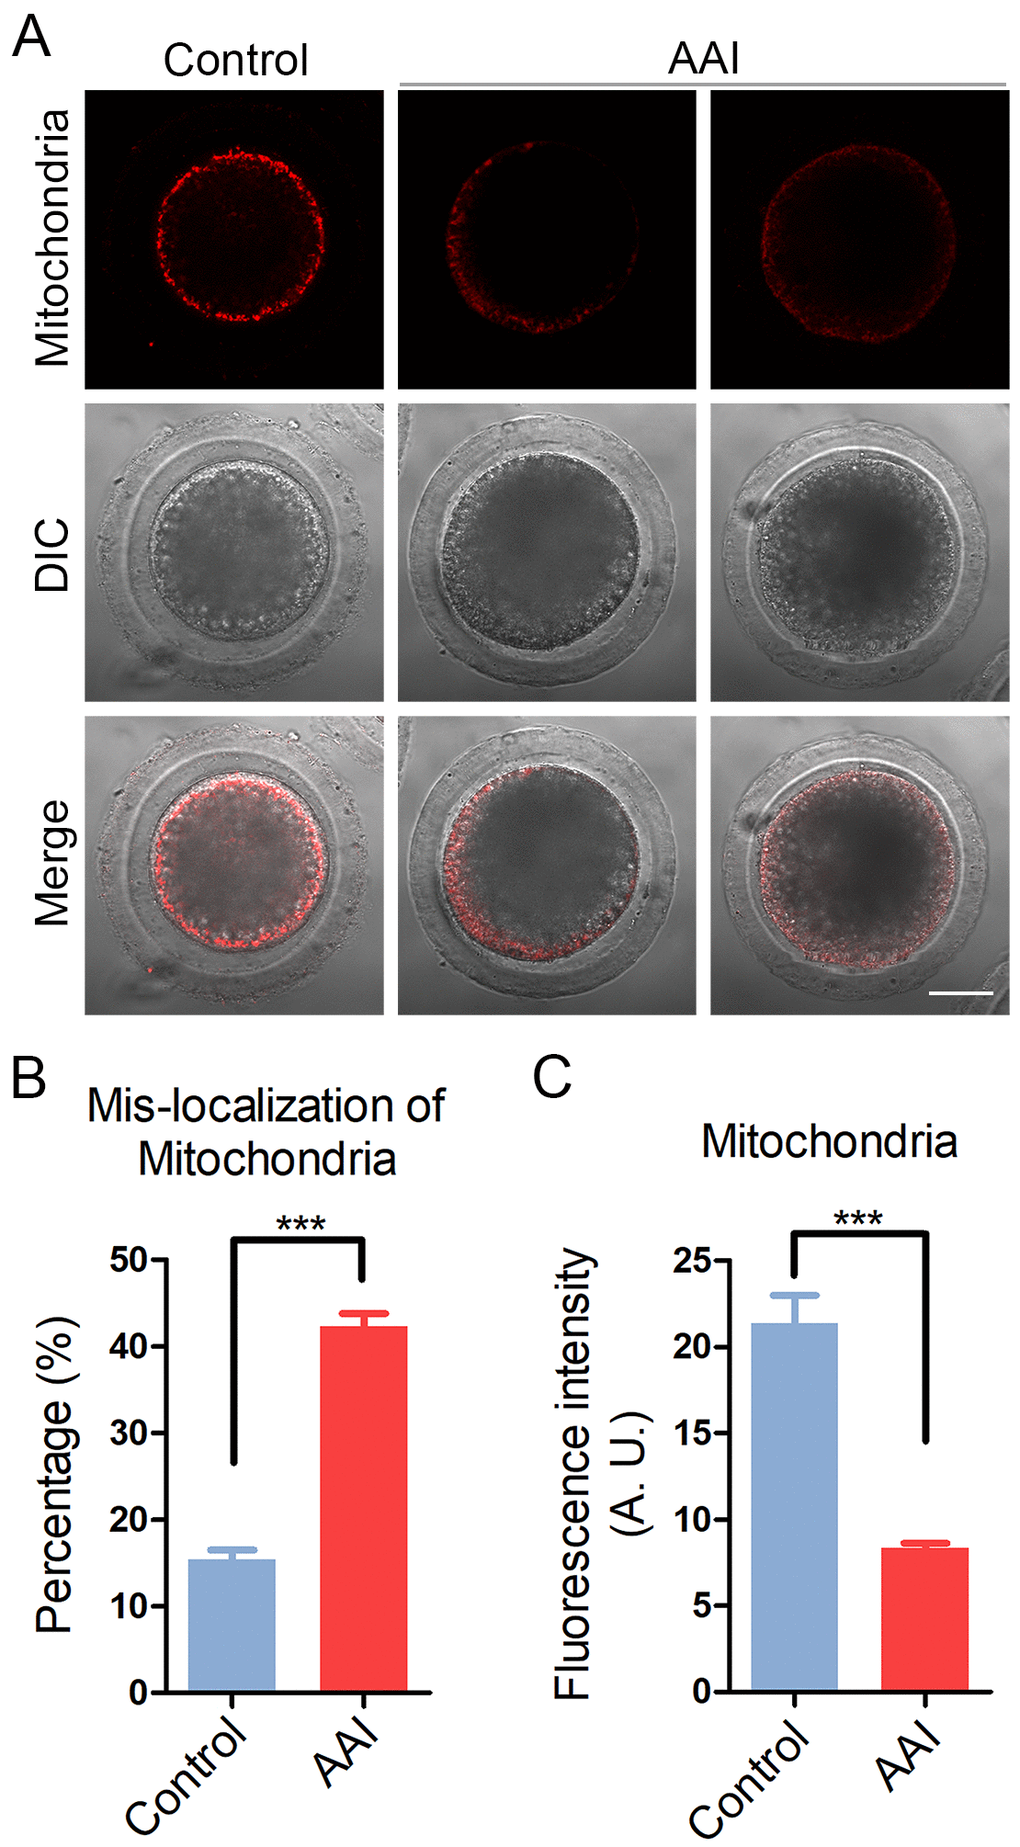 Effects of AAI exposure on the distribution of mitochondria in porcine oocytes. (A) Representative images of mitochondrial staining in control and AAI-exposed oocytes. Scale bar, 20 μm. (B) Abnormal rates of mitochondrial distribution in control and AAI-exposed oocytes. (C) The fluorescence intensity of mitochondrial signals was measured in control and AAI-exposed oocytes. Data in (B) and (C) were presented as mean percentage (mean ± SEM) of at least three independent experiments. ***P 